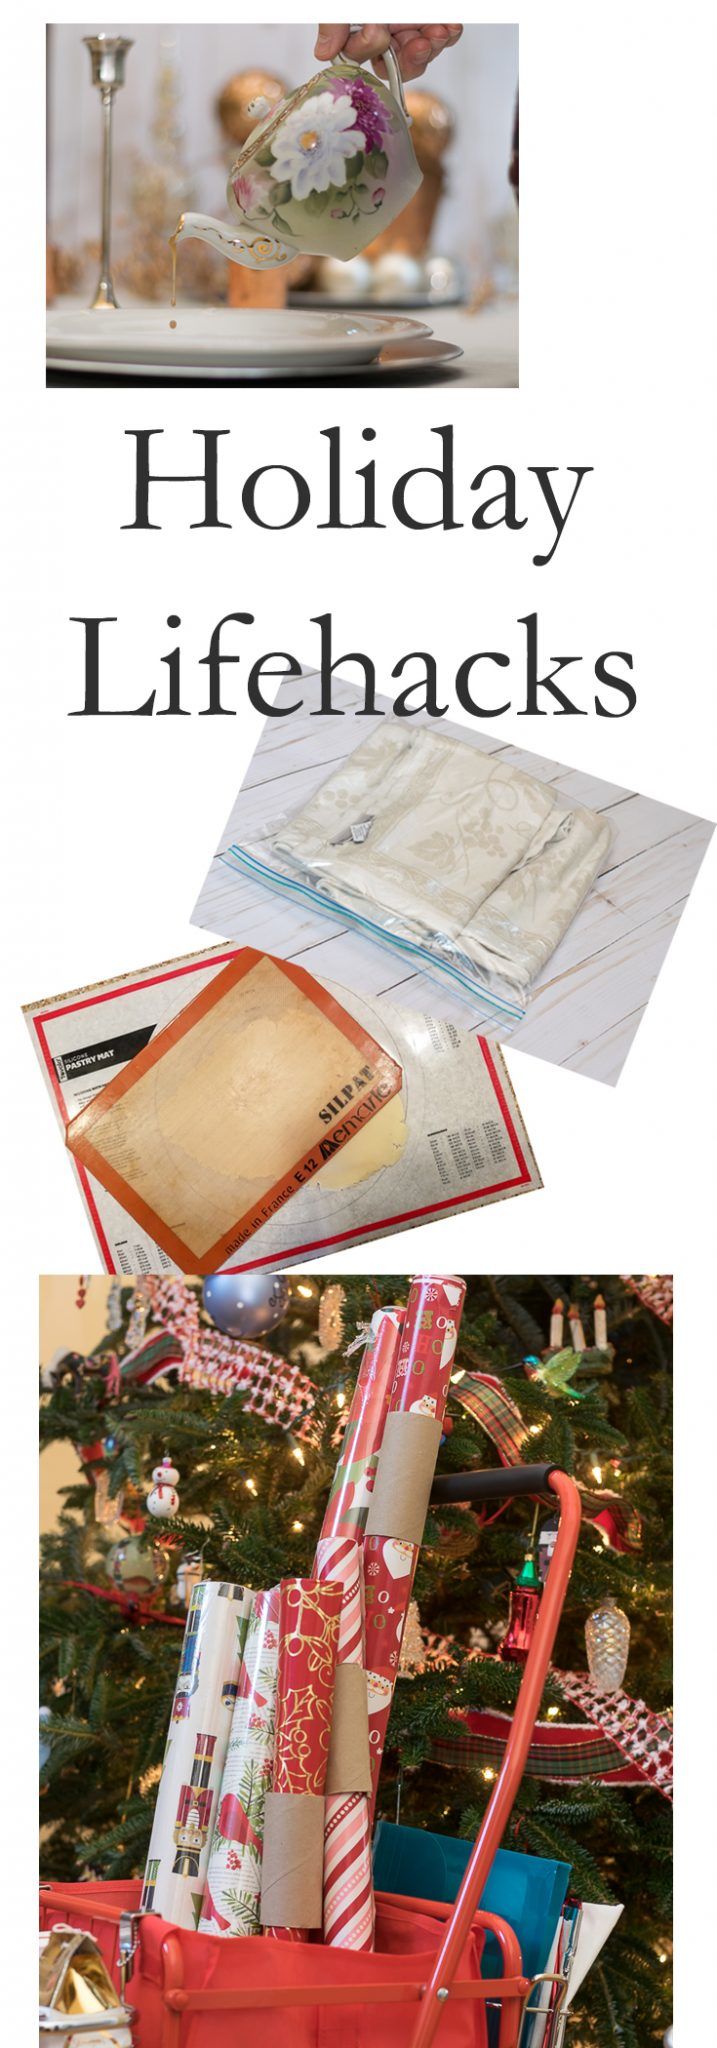 Holiday Lifehacks and useful tips to make your holiday and entertaining just a little easier, less expensive or to help you work smarter during the holidays. Hacks and Life Hacks.